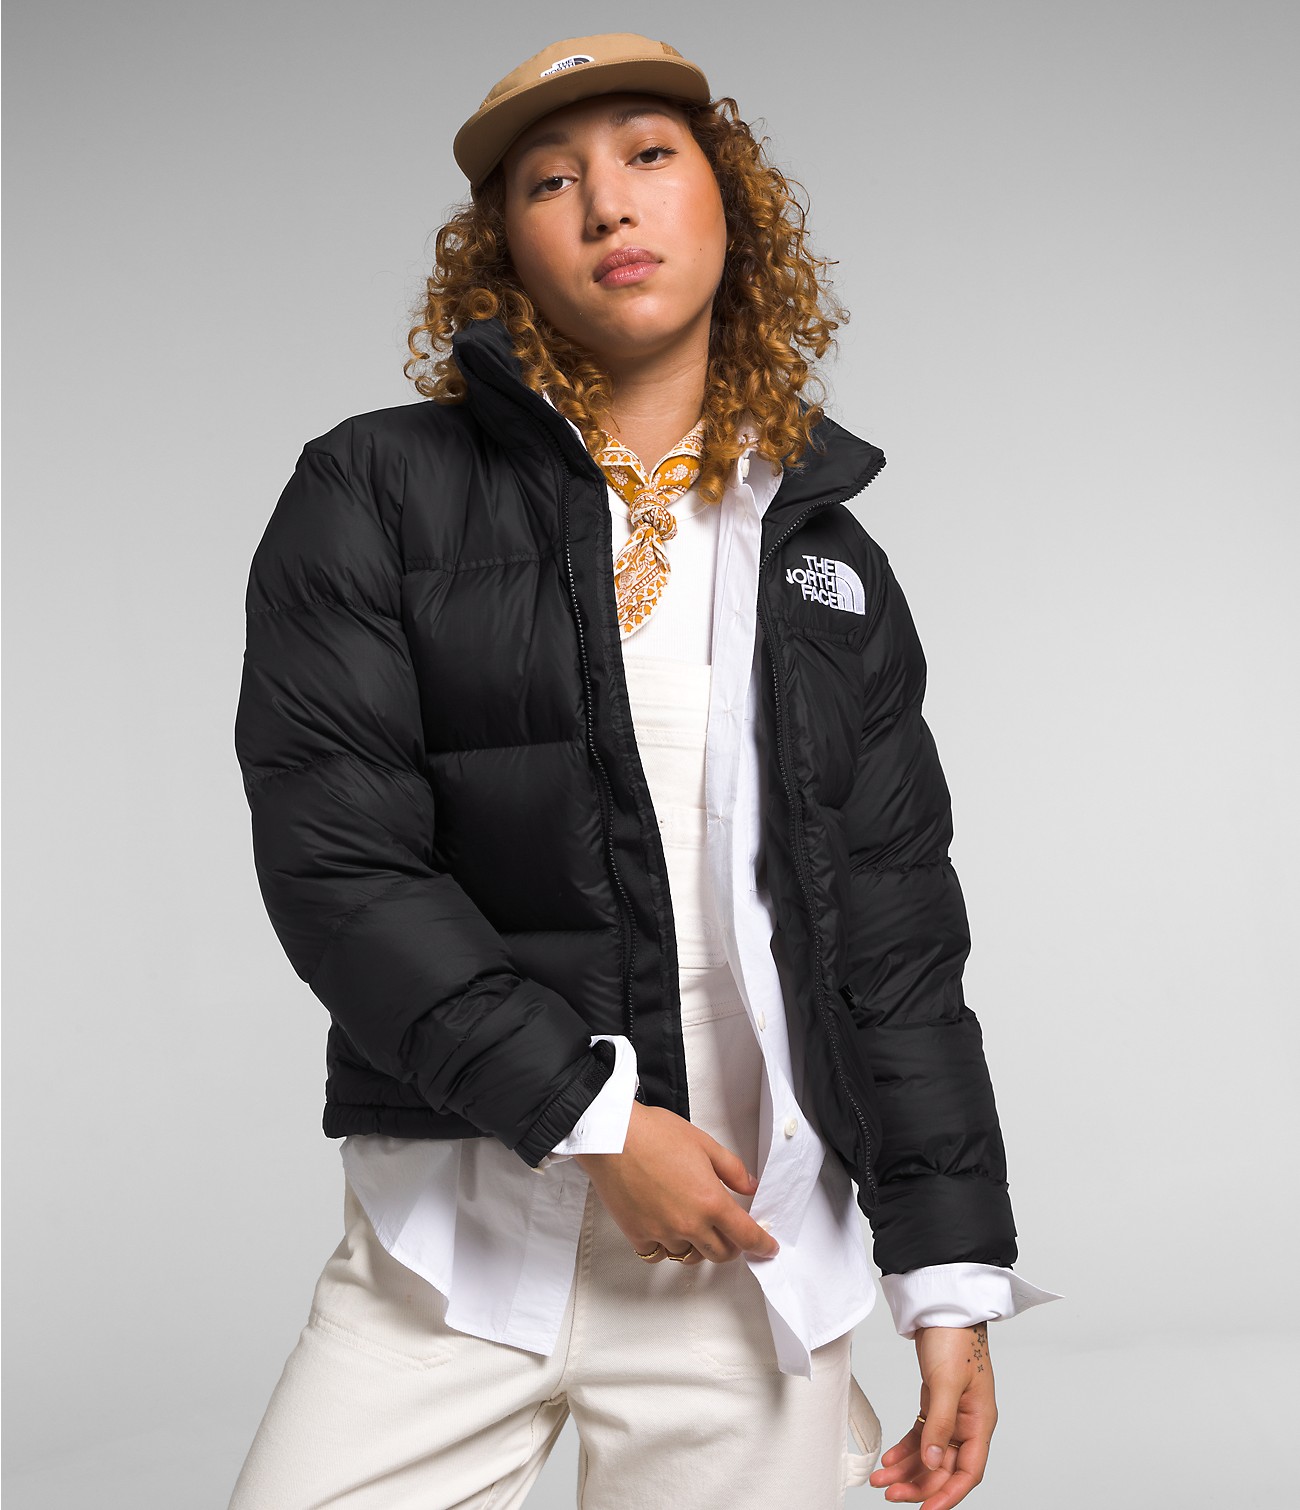 Unlock Wilderness' choice in the Moncler Vs North Face comparison, the 1996 Retro Nuptse Jacket by The North Face